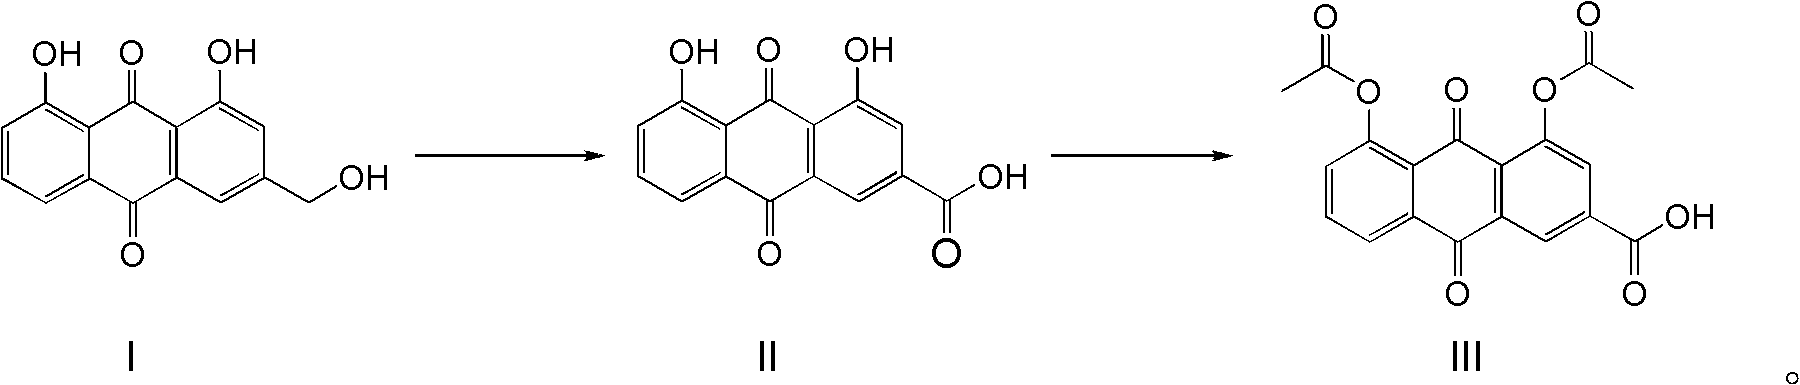 Synthetic process for diacerein